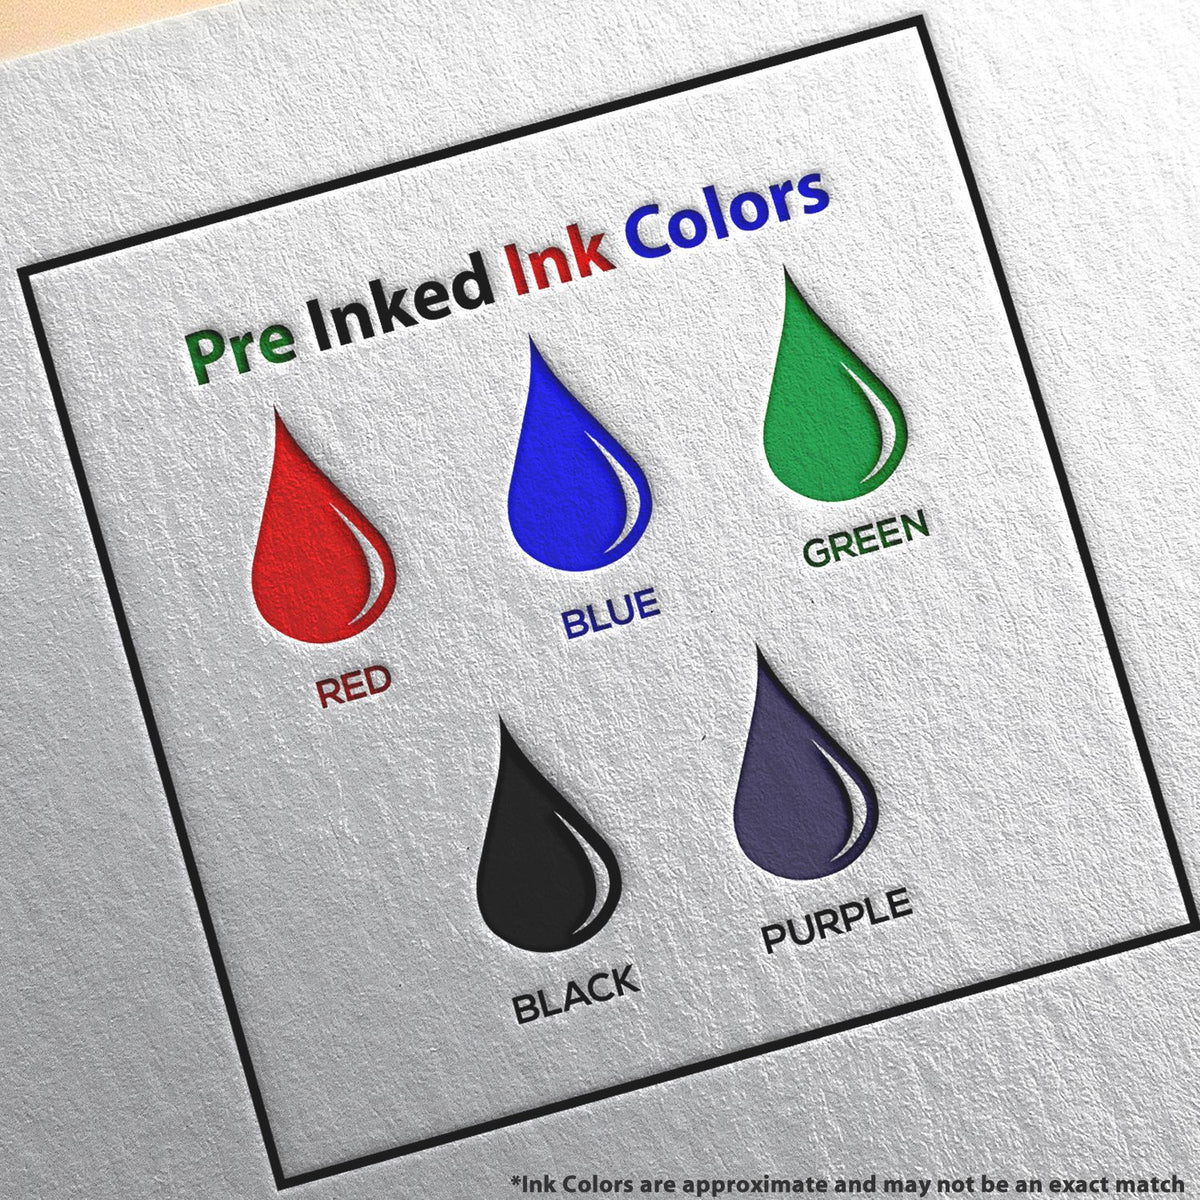 A picture showing the different ink colors or hues available for the PSI Indiana Notary Stamp product.